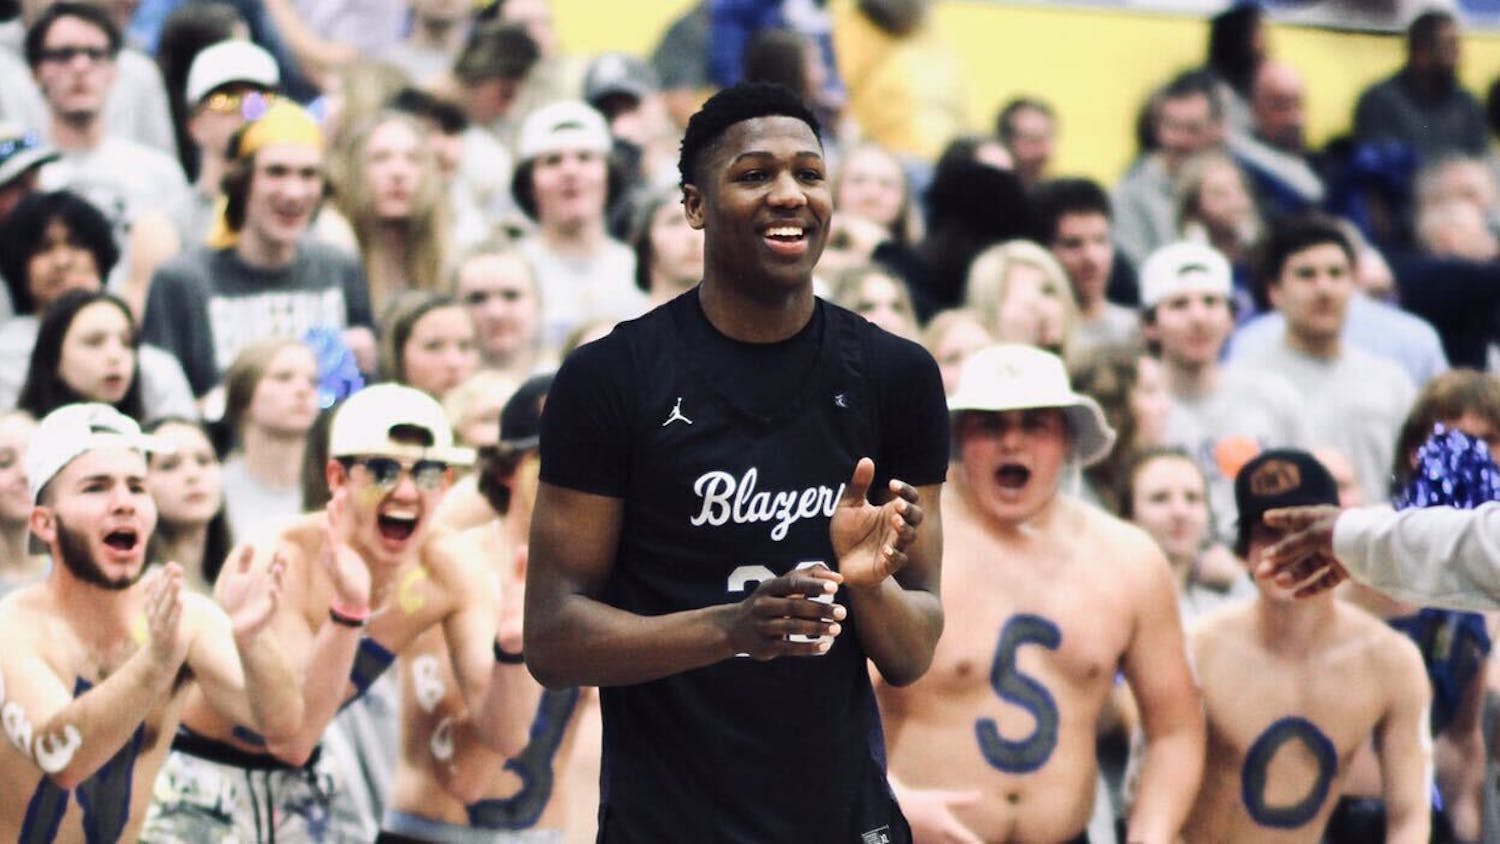 Ridge View power forward GG Jackson during a game against Fort Mill High School on Feb. 21, 2022. Jackson and the Blazers went on to defeat the Yellow Jackets 63-44 to advance to the Upper State Championship.